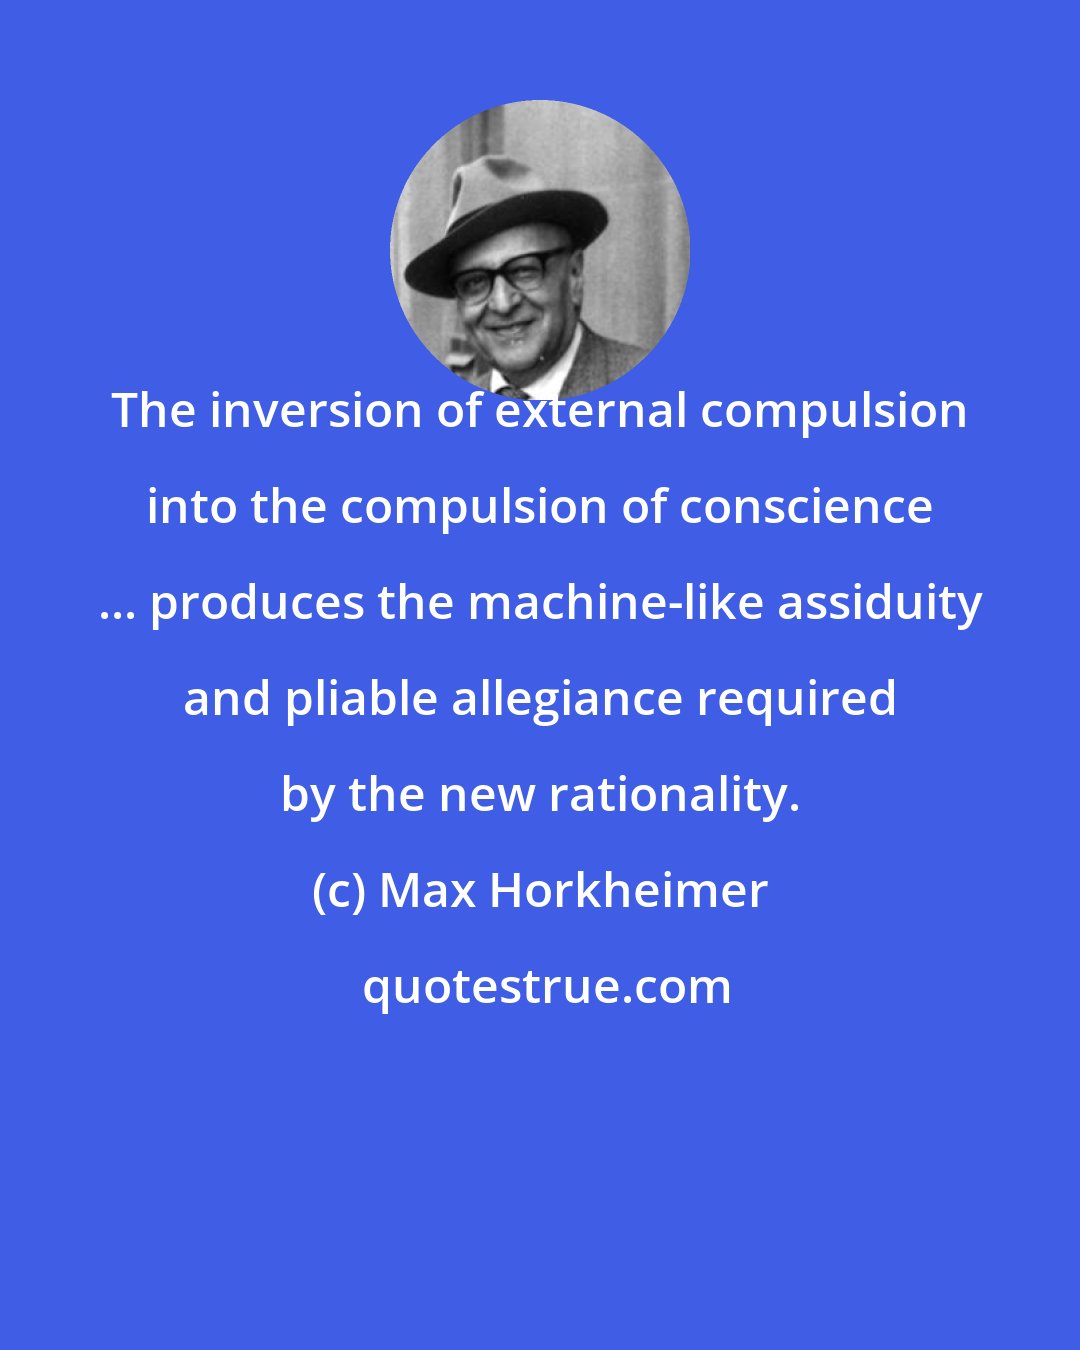 Max Horkheimer: The inversion of external compulsion into the compulsion of conscience ... produces the machine-like assiduity and pliable allegiance required by the new rationality.